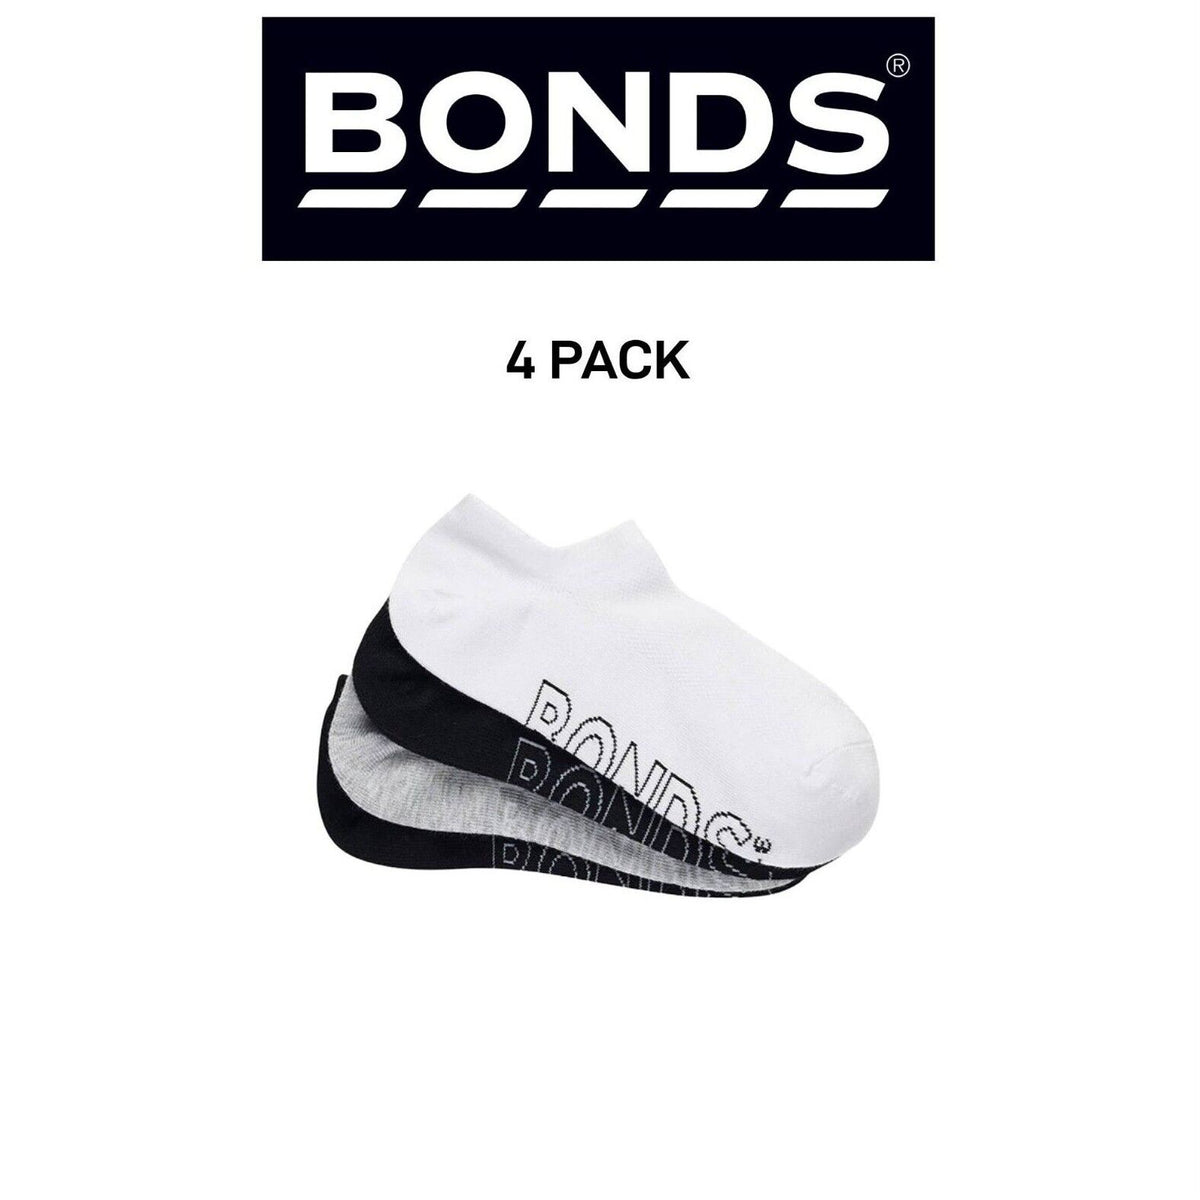 Bonds Womens Lightweight No Show Cotton Mesh Cooling Zone Socks 4 Pack LXPW4N